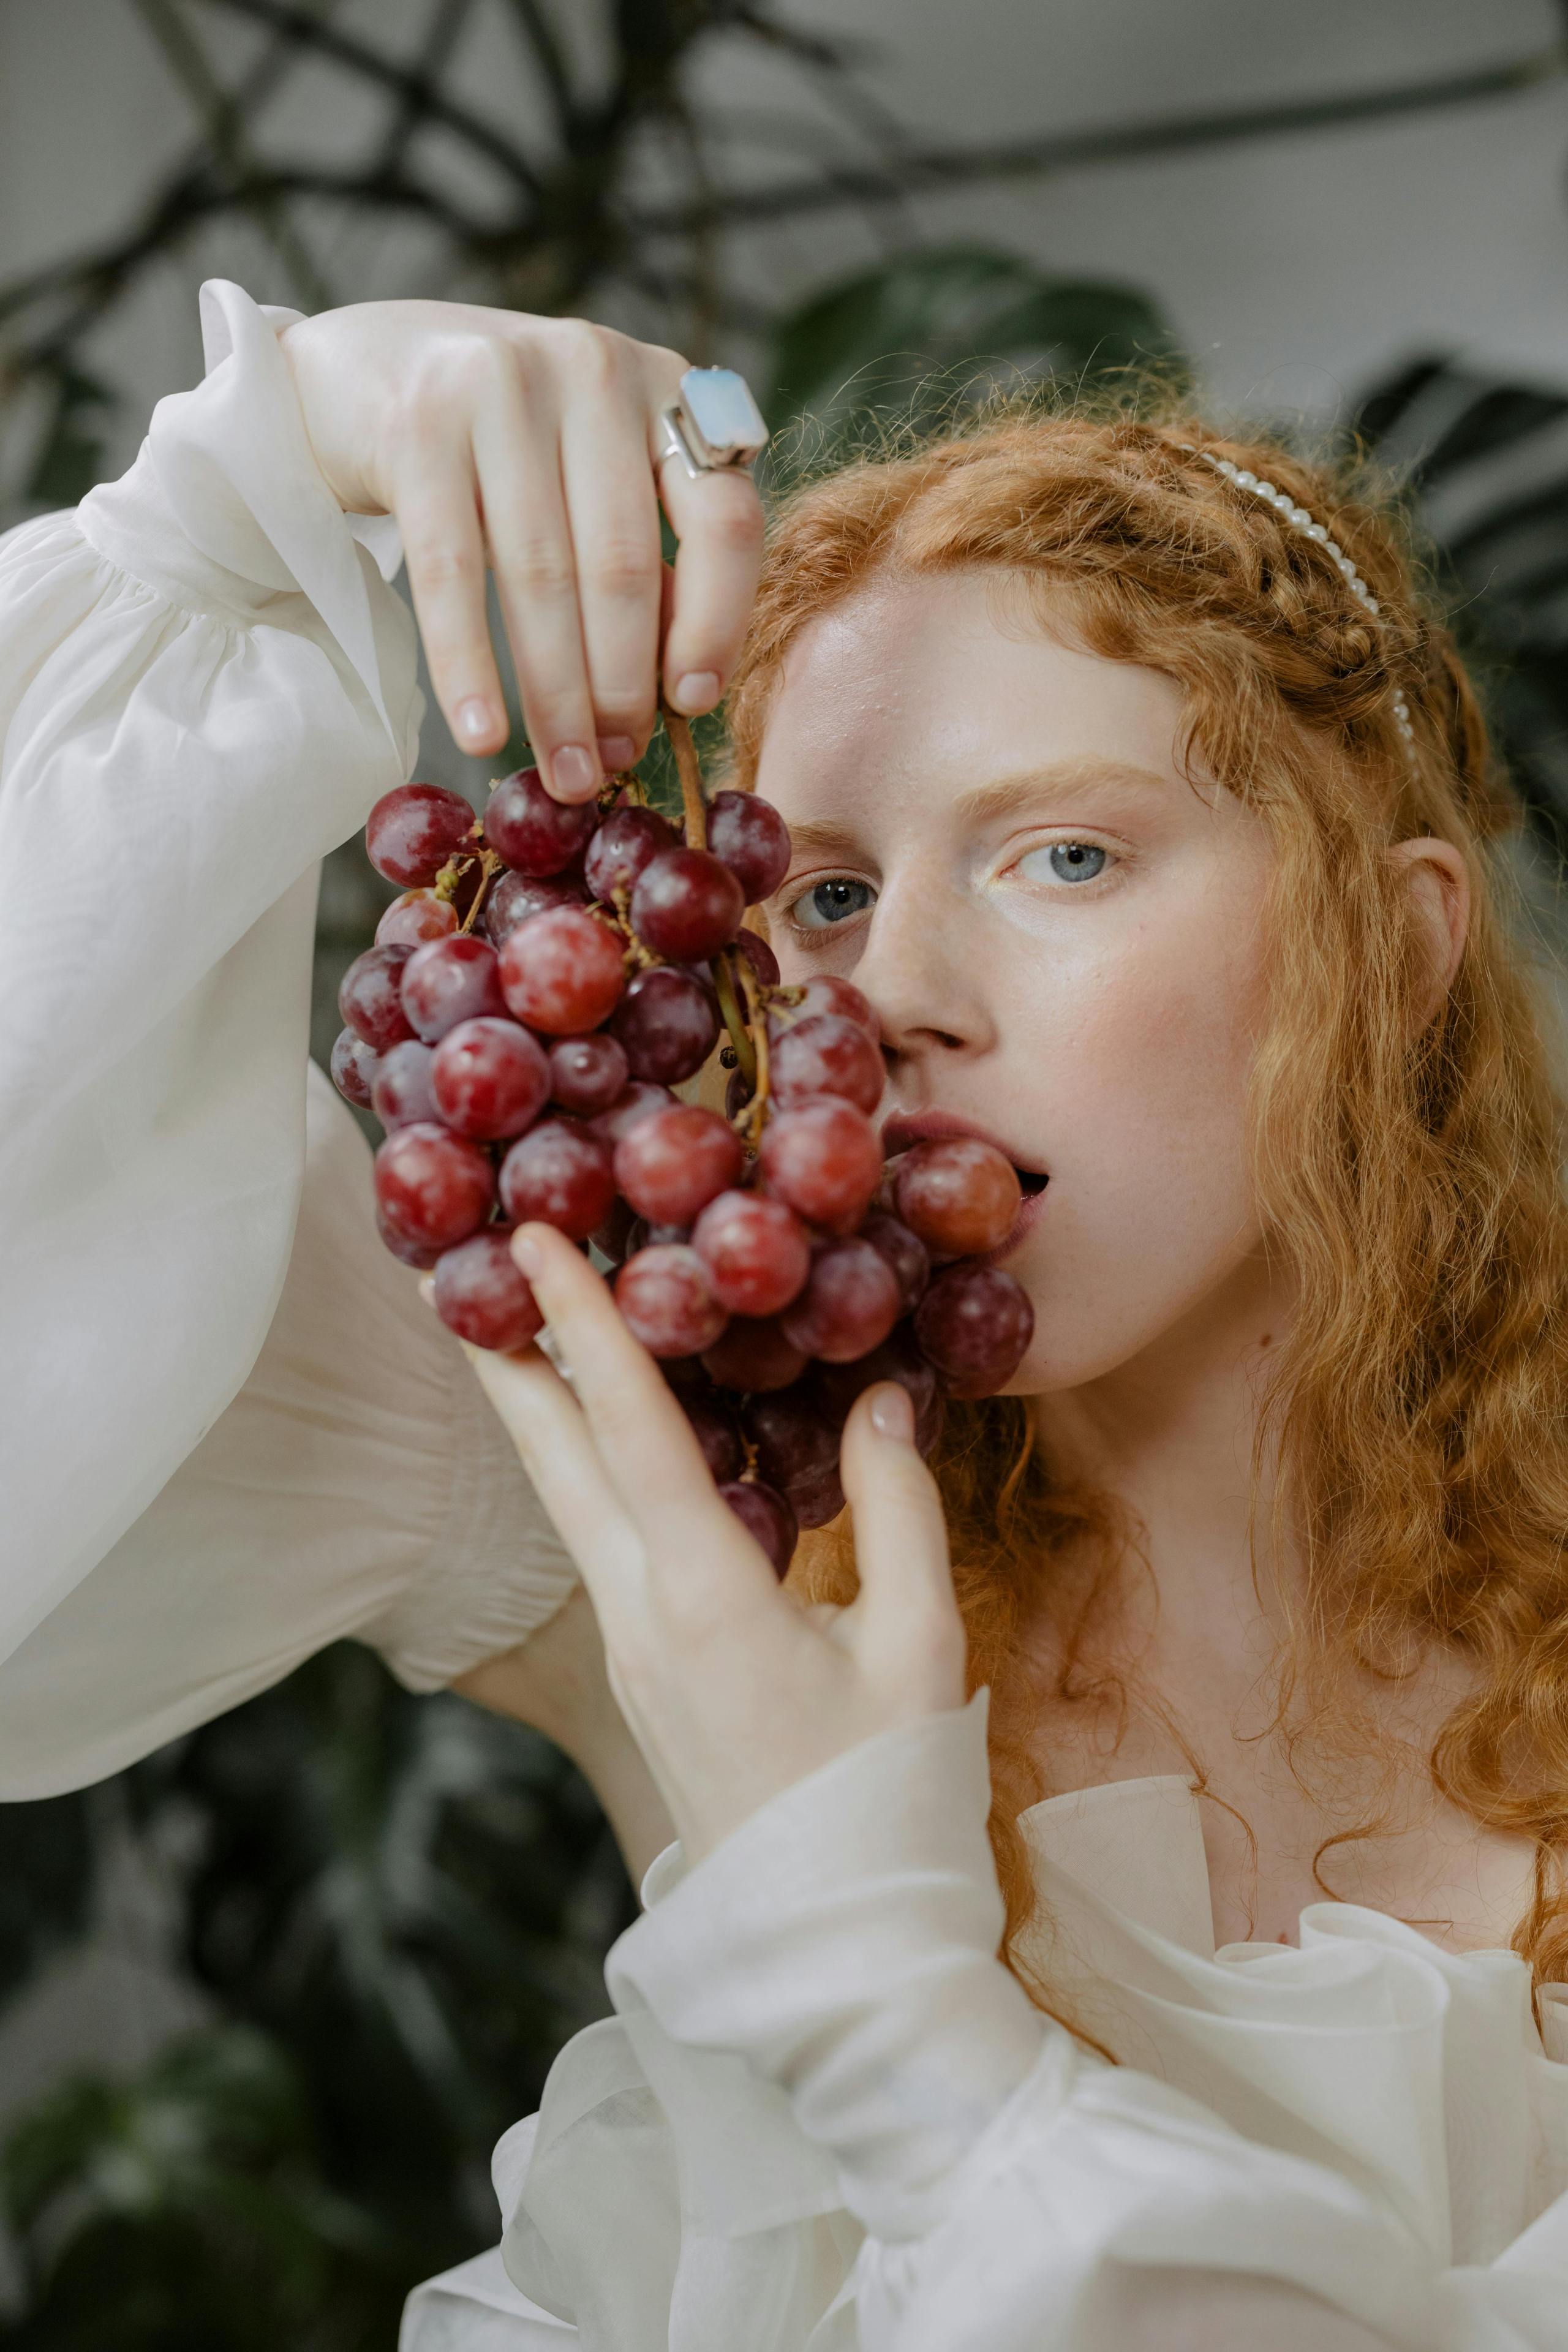 A woman holds a bunch of purple grapes to her lips, poised to eat them.